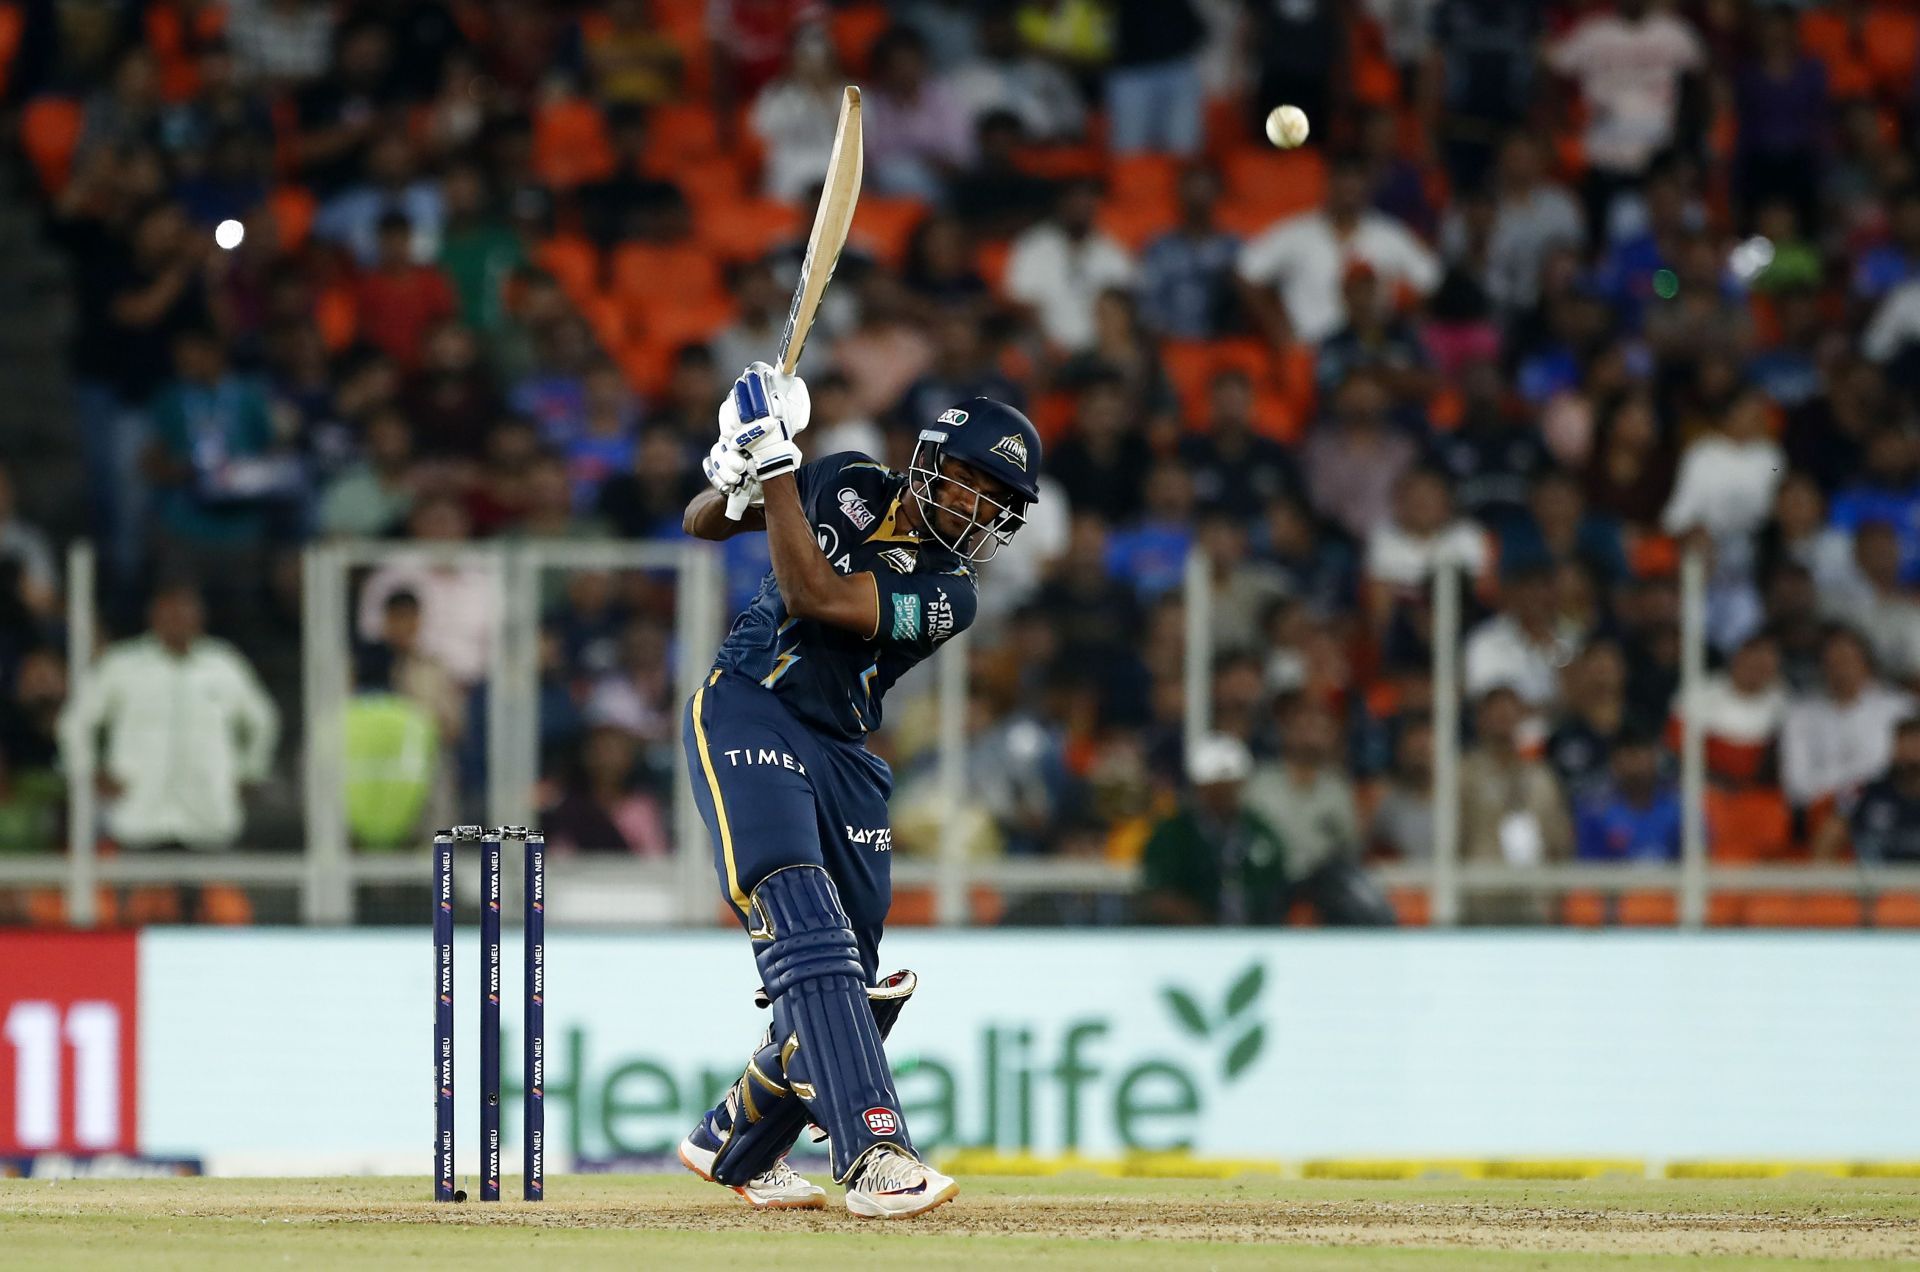 Can Gujarat Titans defeat Mumbai Indians once again? (Image: Getty)